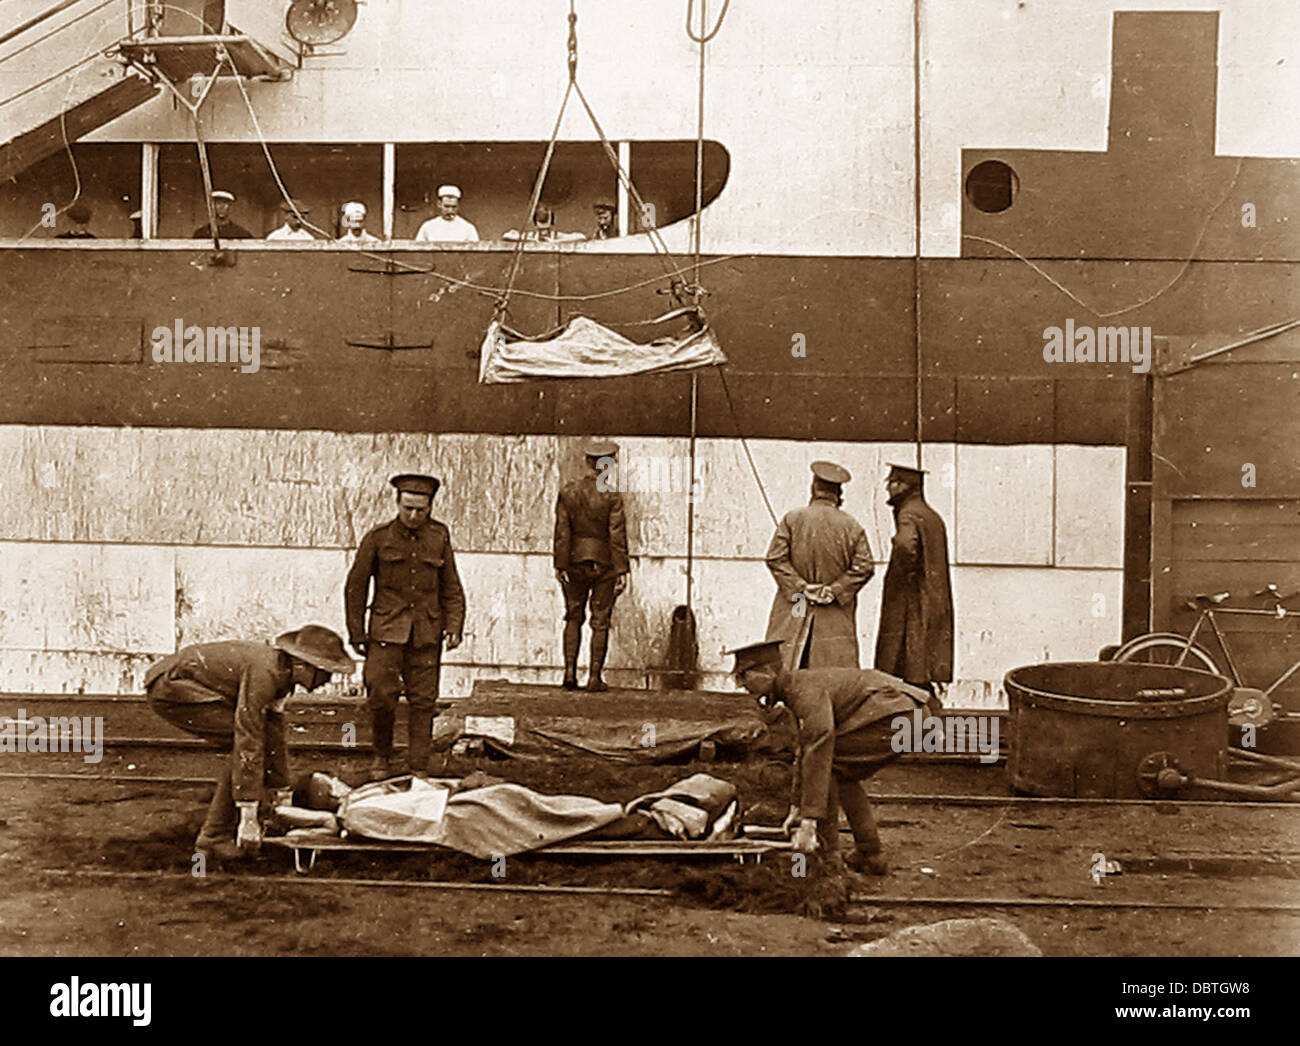 Hoisting wounded soldiers on board ship during WW1 Stock Photo